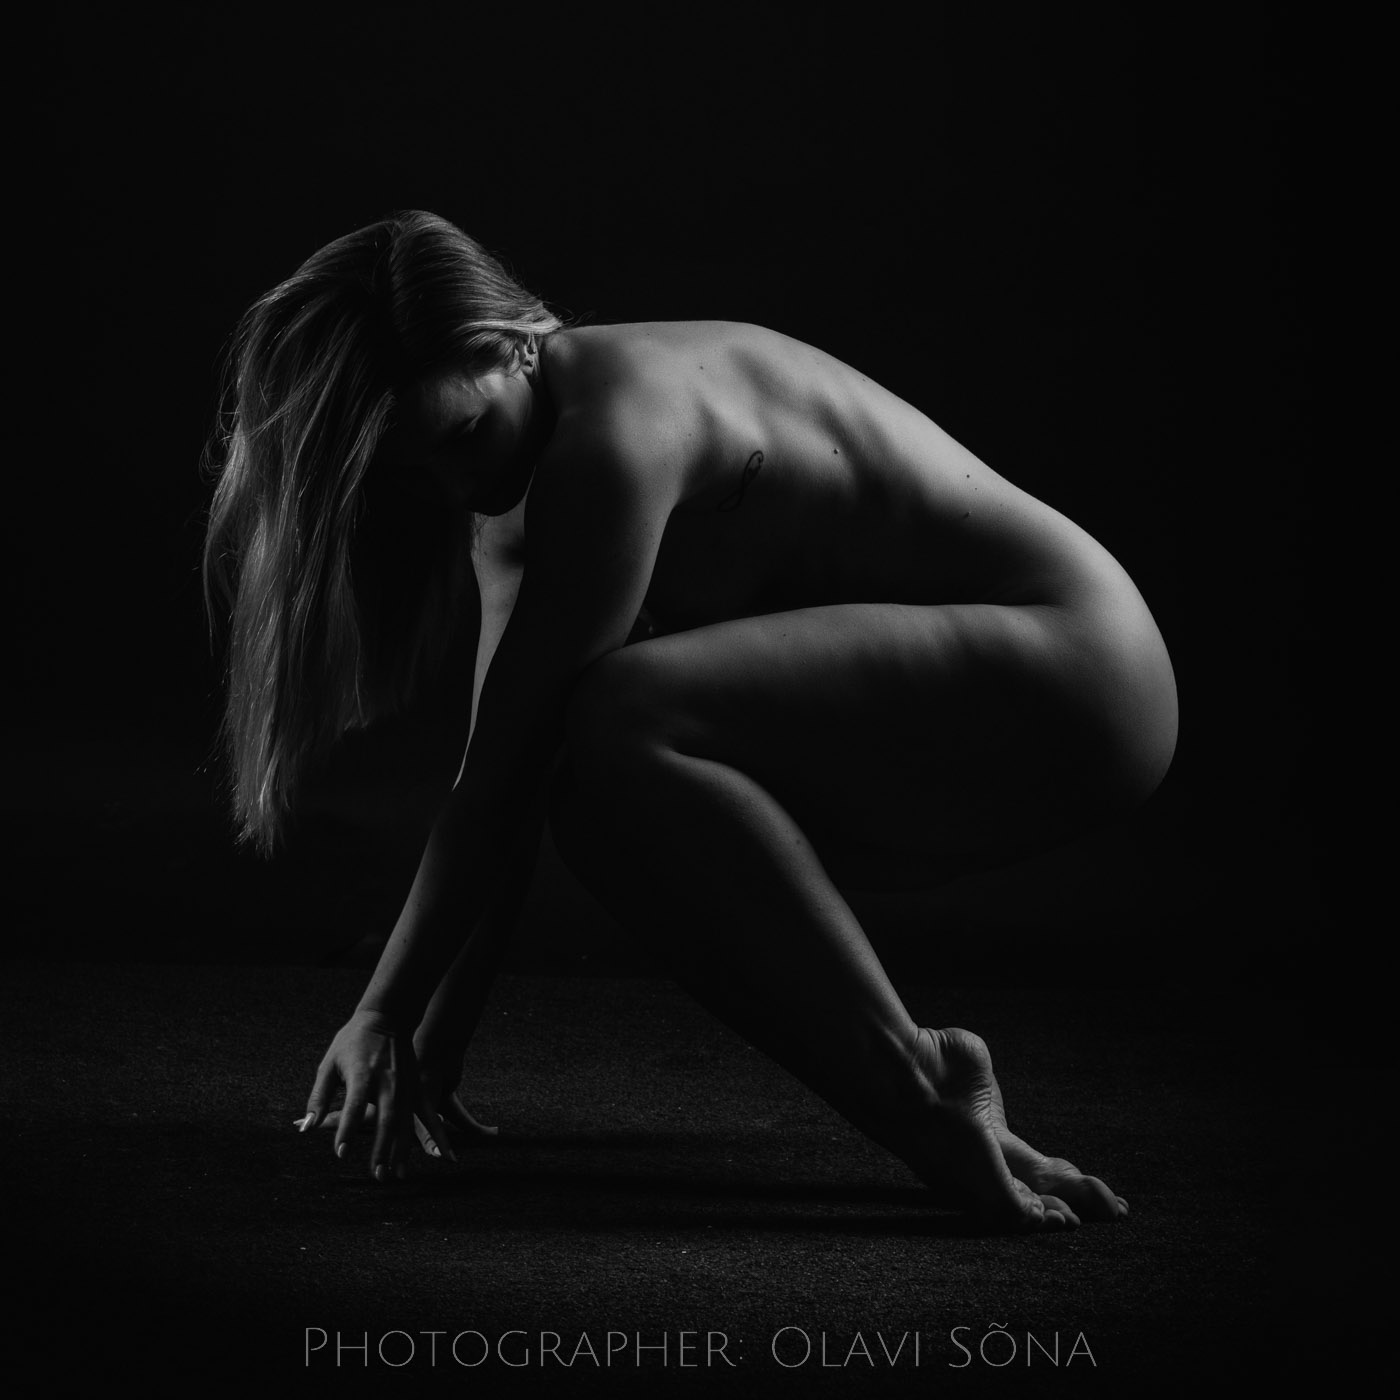 Nude art - woman in a pose